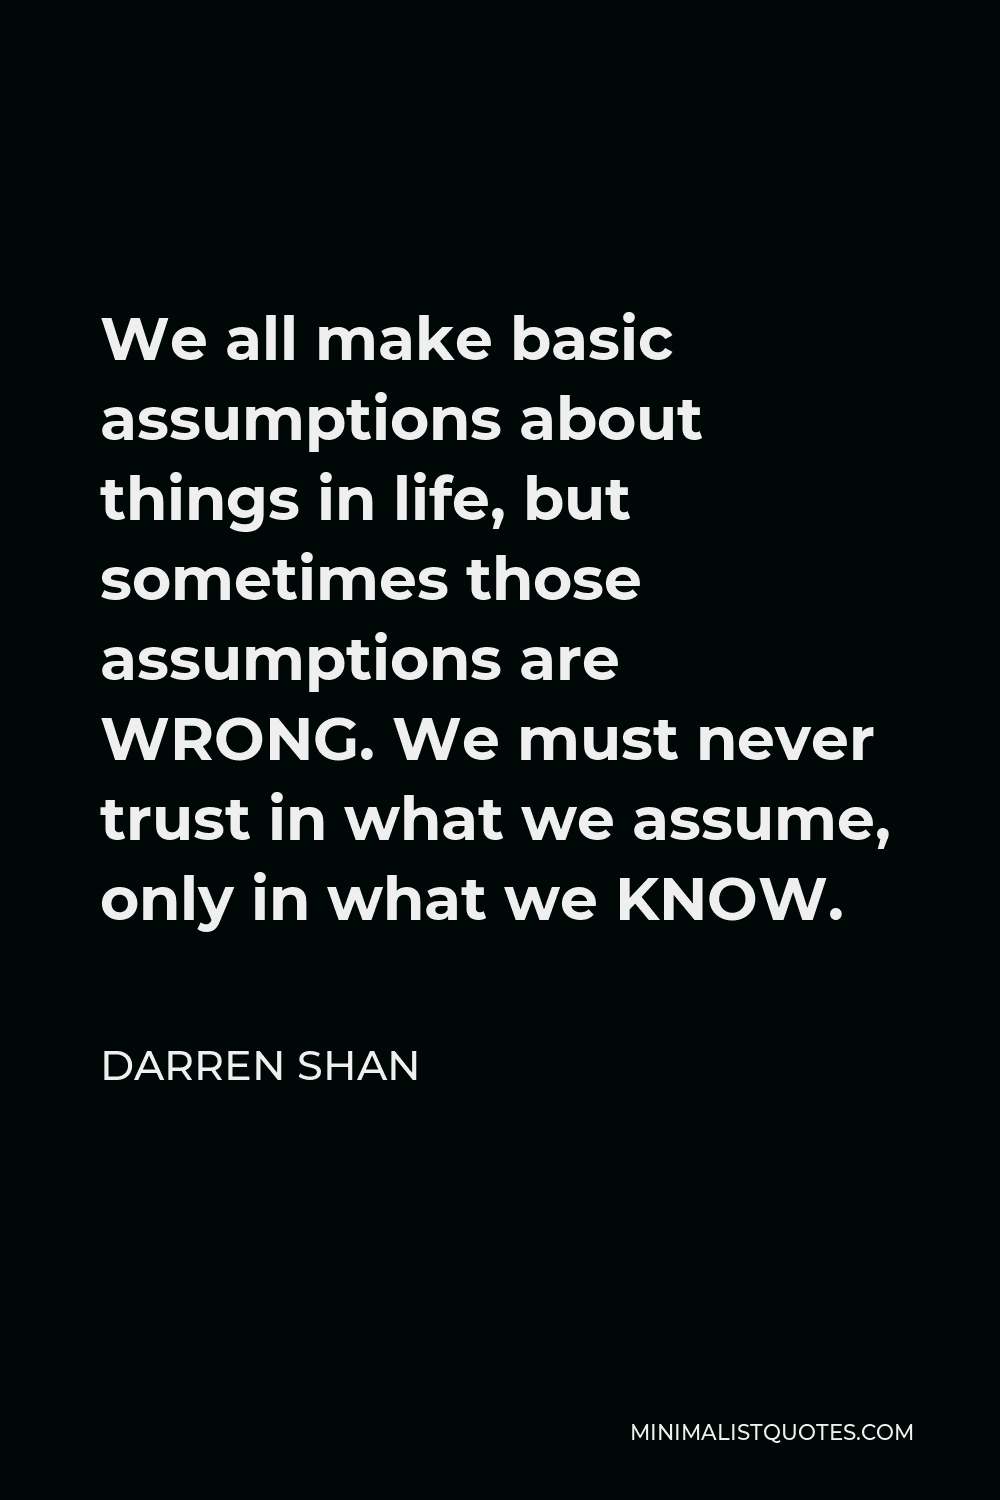 Darren Shan Quote - We all make basic assumptions about things in life, but sometimes those assumptions are WRONG. We must never trust in what we assume, only in what we KNOW.